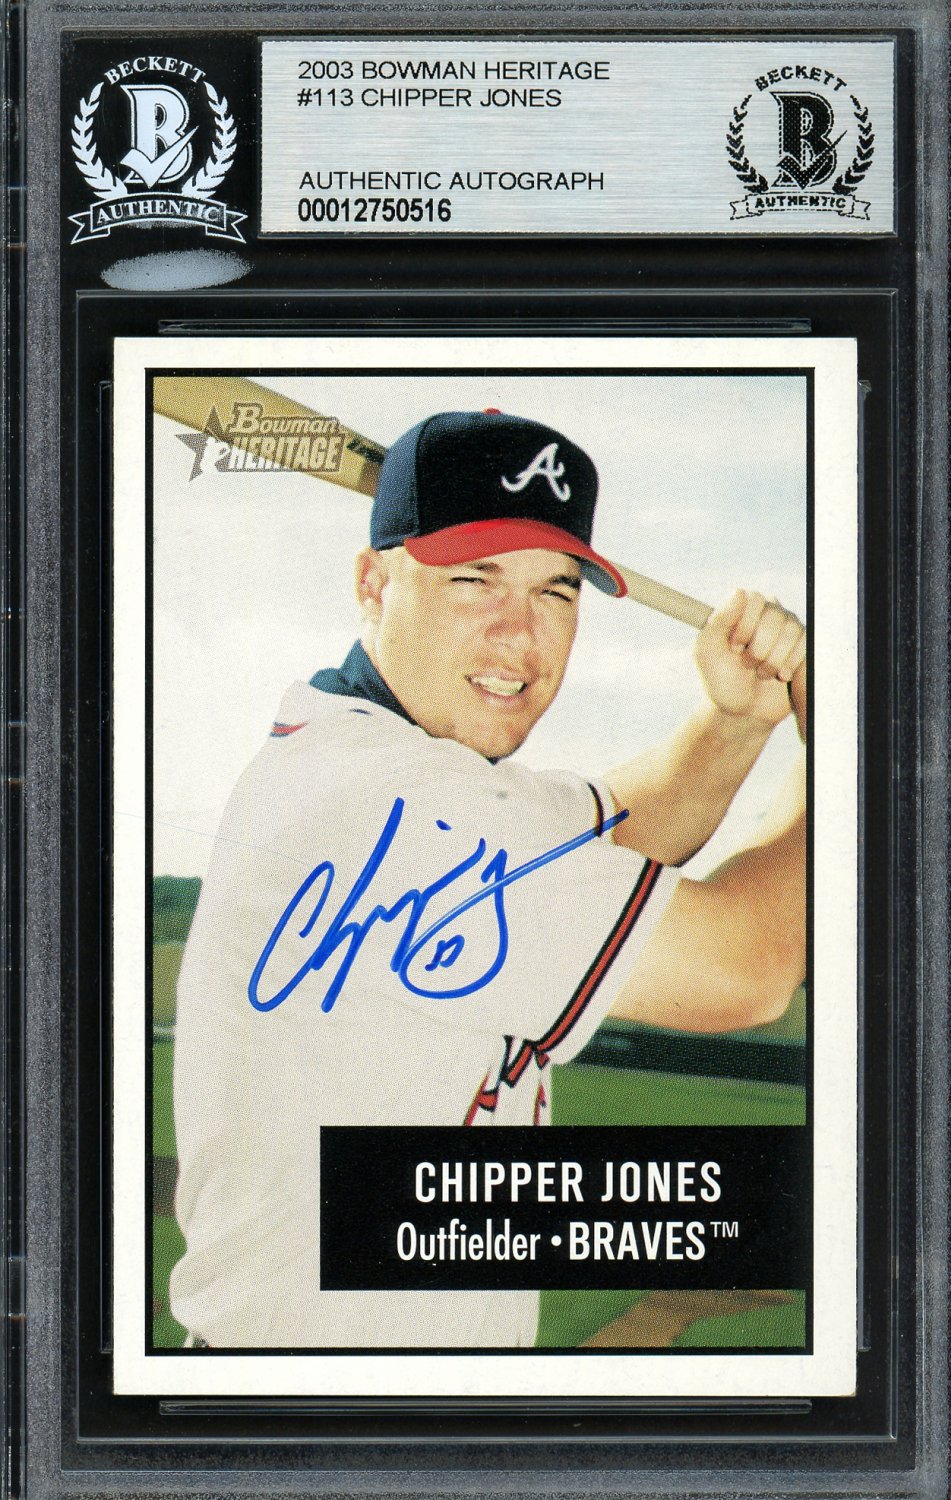 Chipper Jones Autographed Signed 2003 Bowman Heritage Card #113